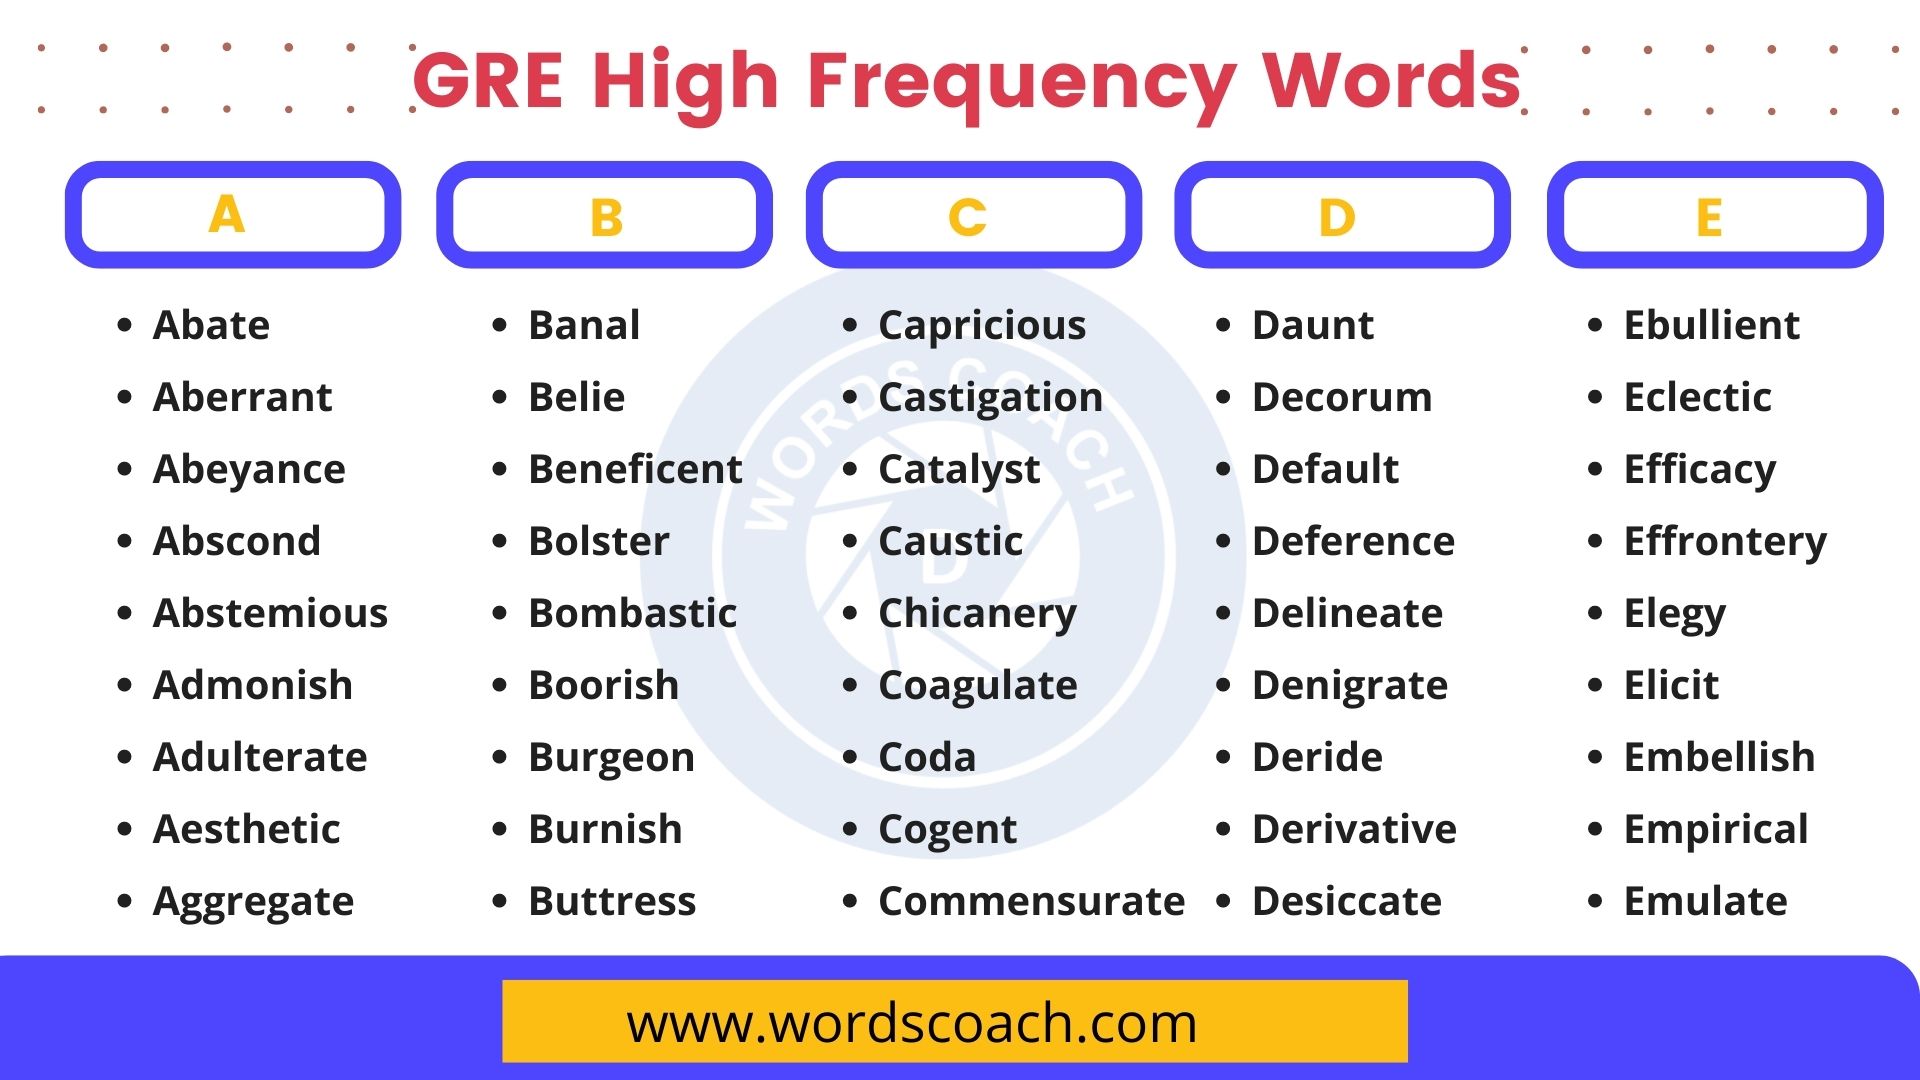 GRE High Frequency Words Vocabulary List - wordscoach.com